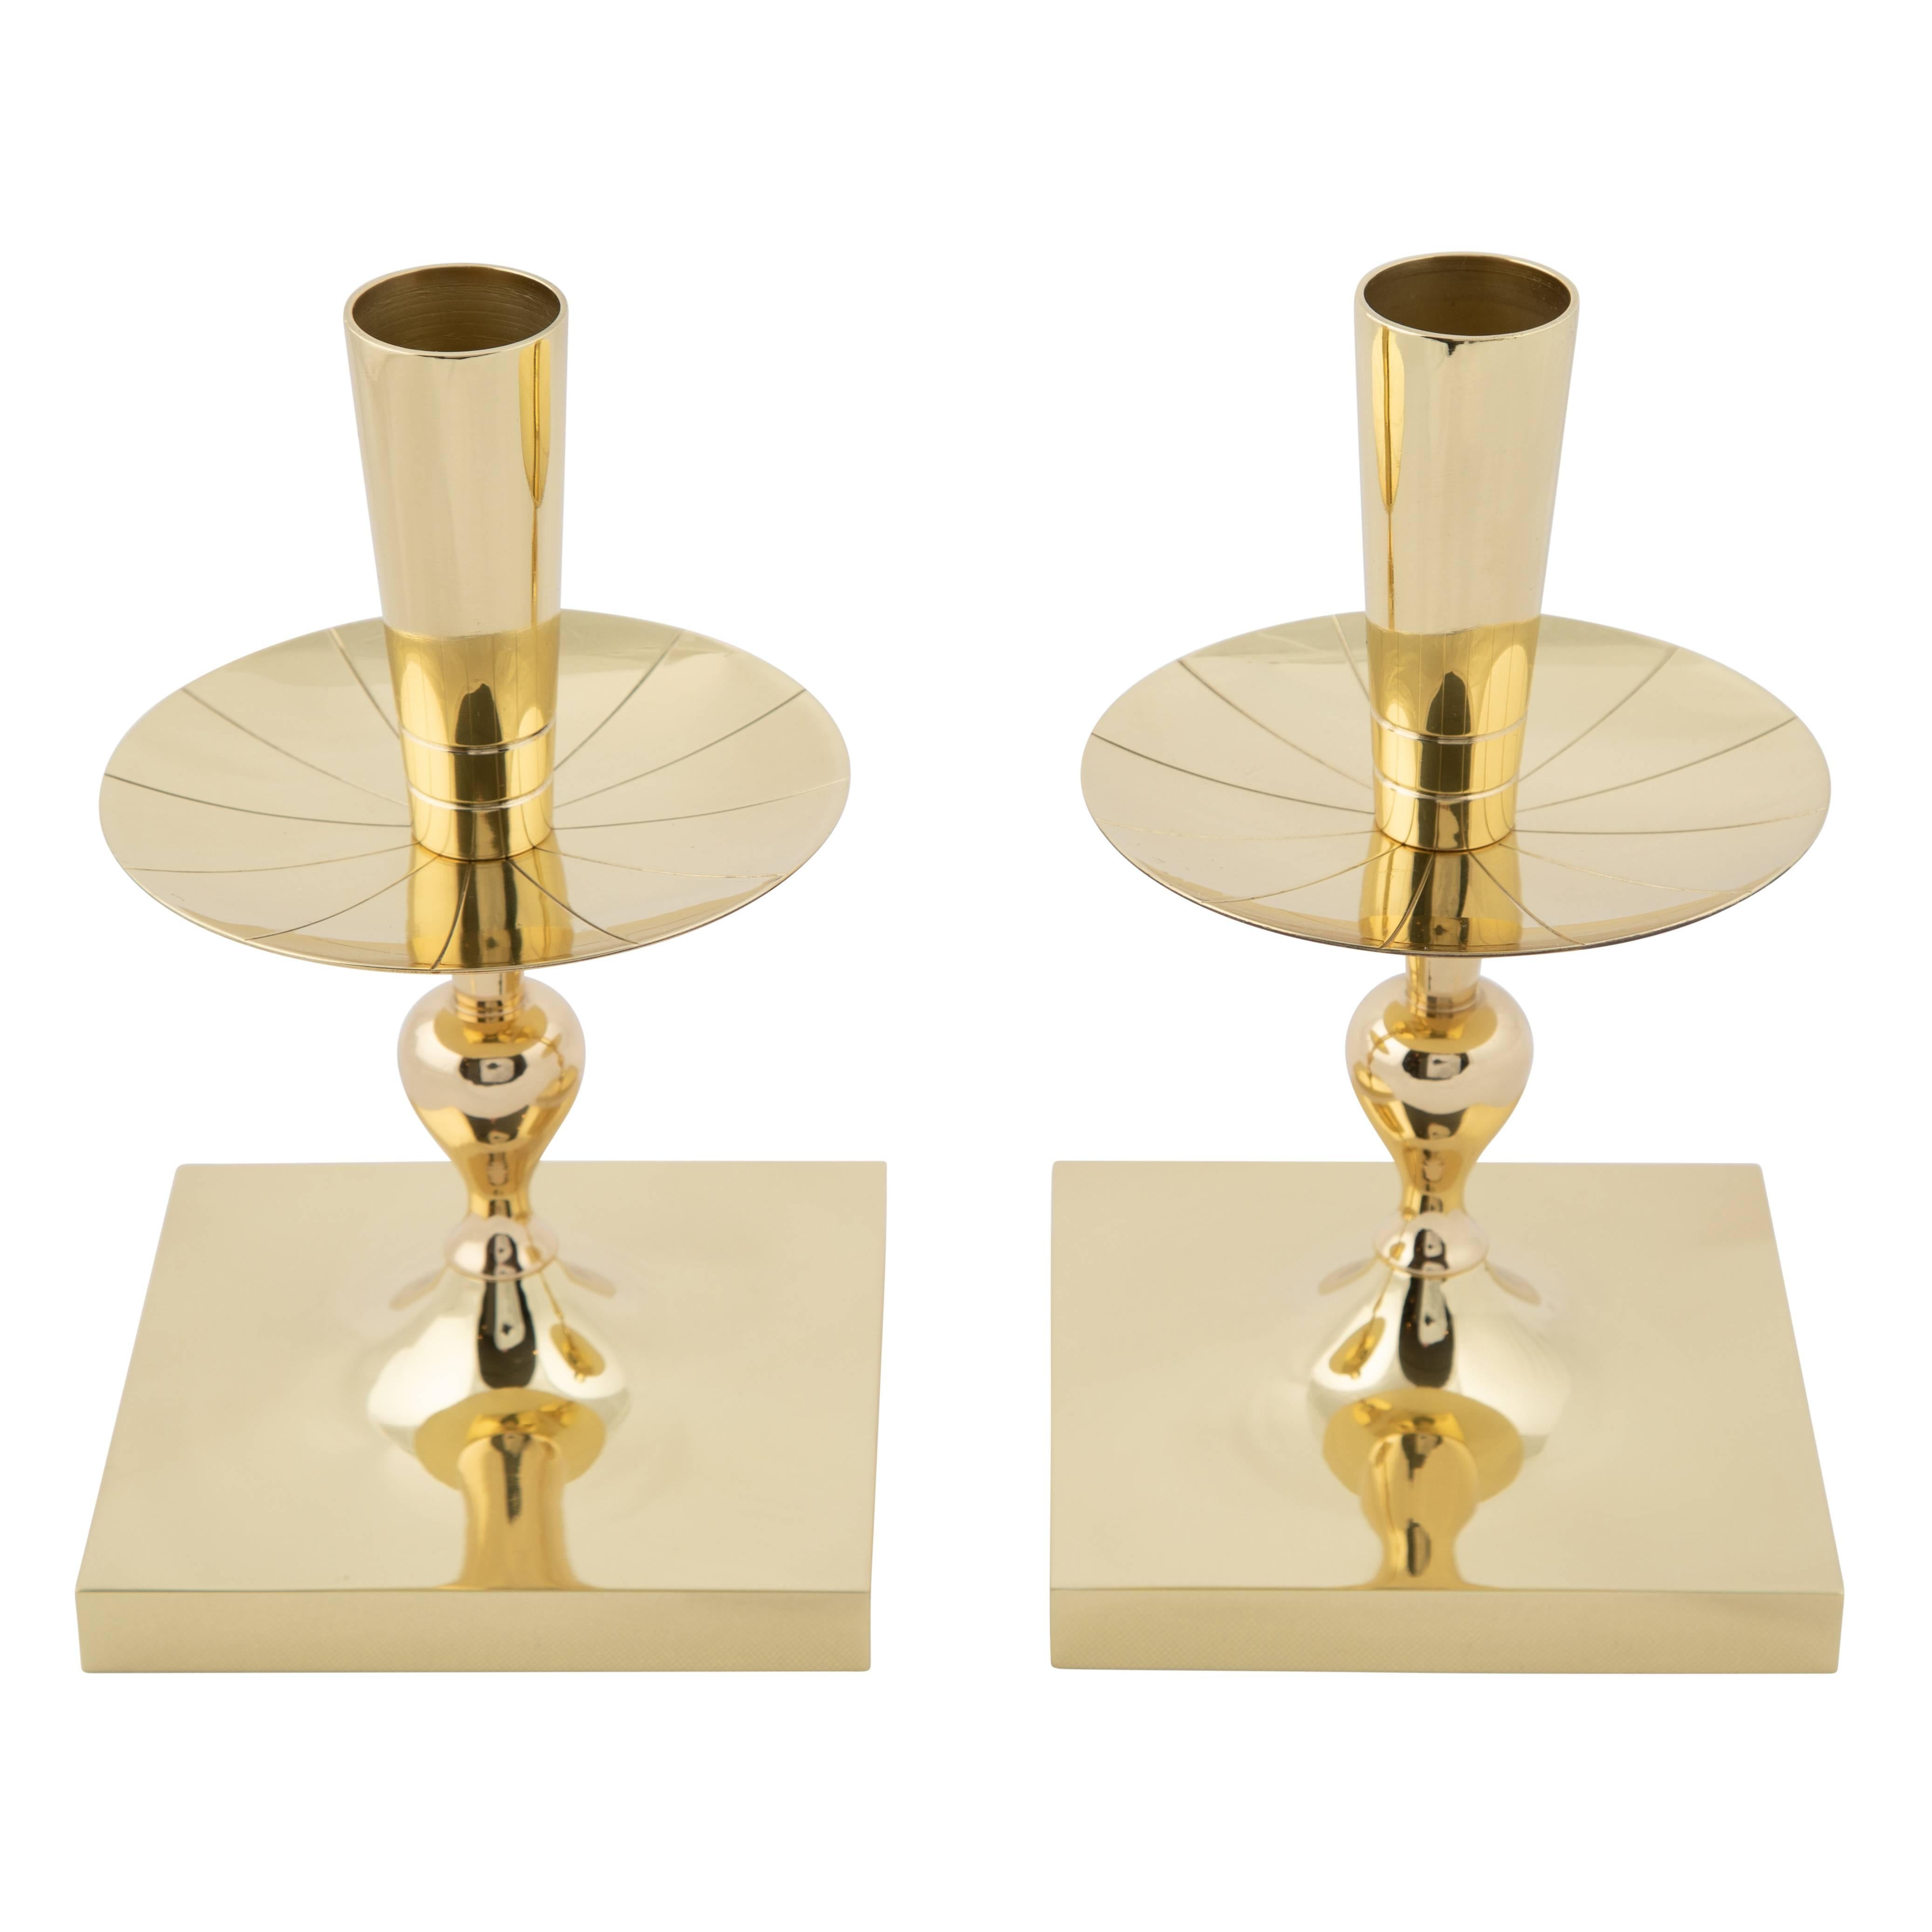 Pair of Tommi Parzinger Brass Candleholders with Square Bases, circa 1950s For Sale